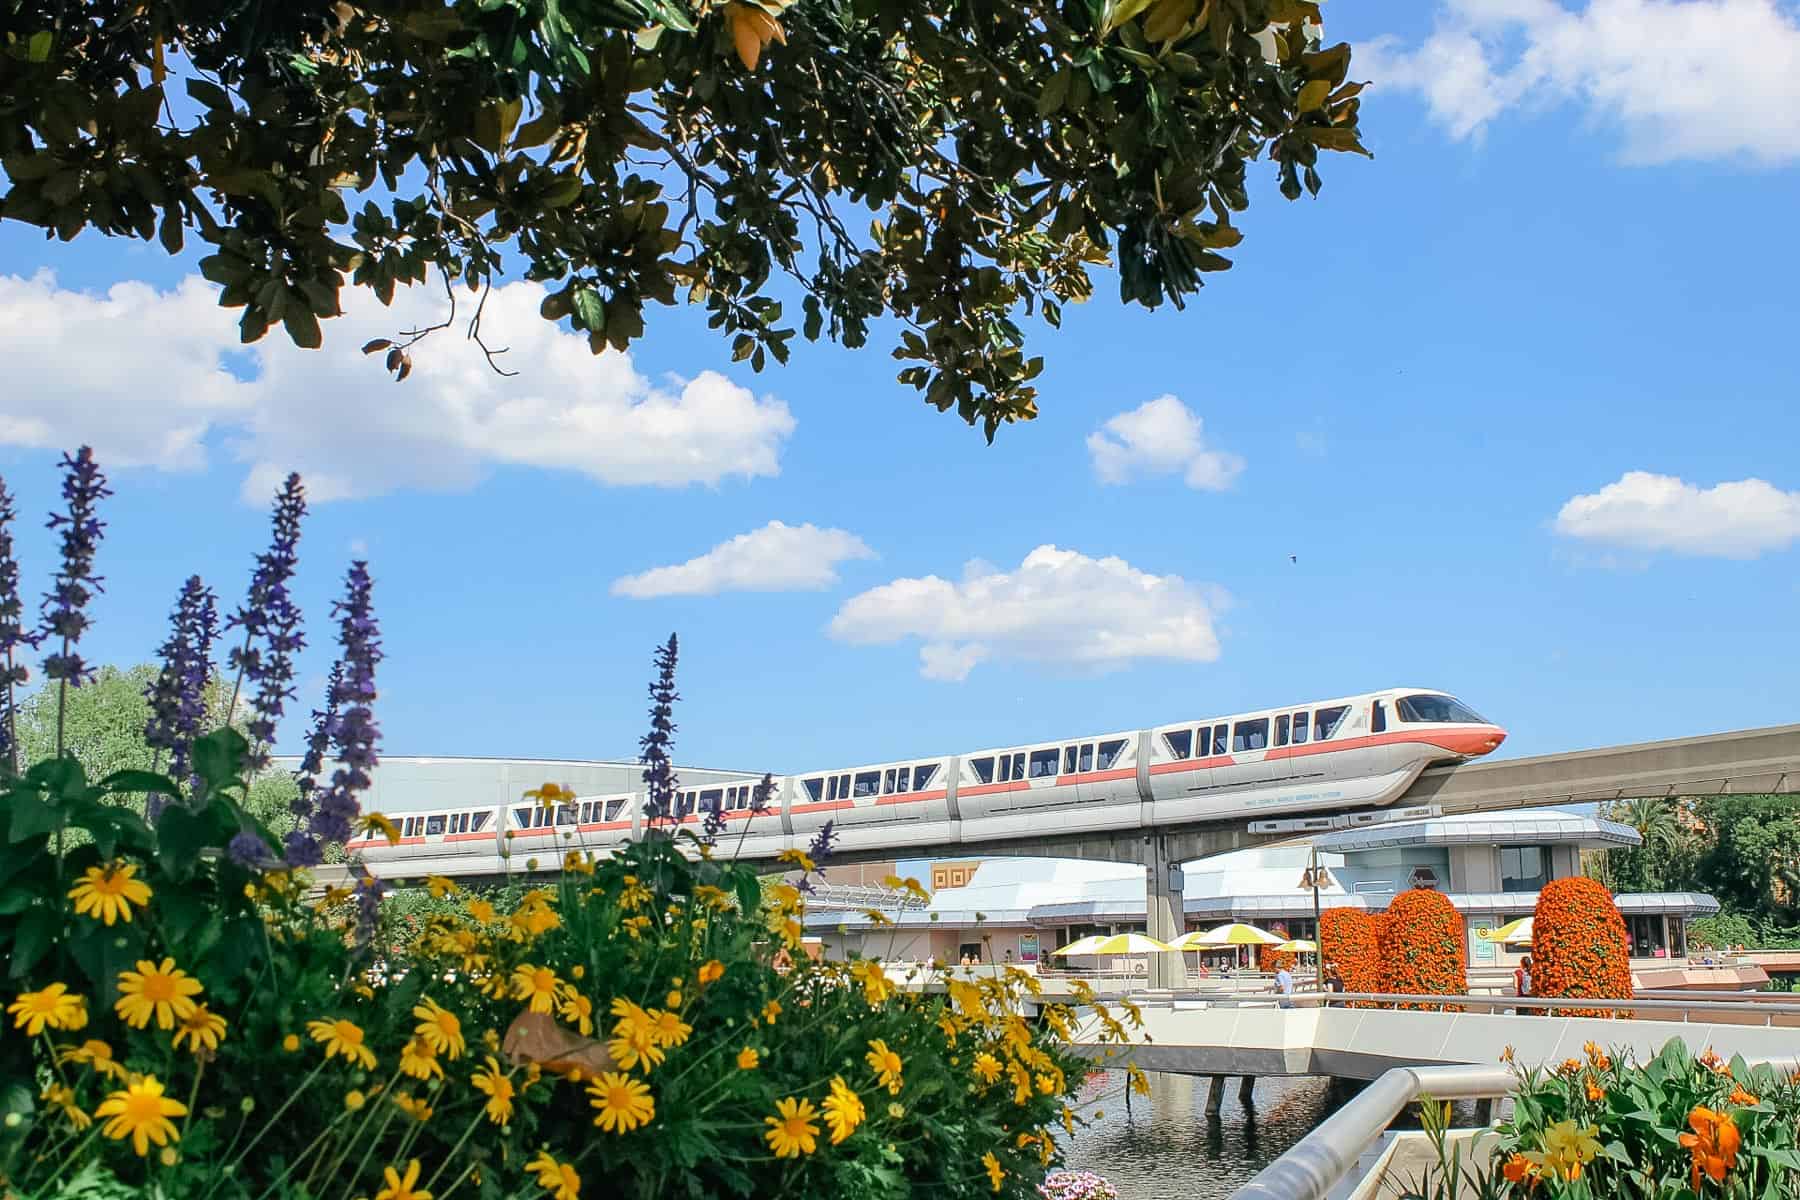 the monorail as it travels through Epcot